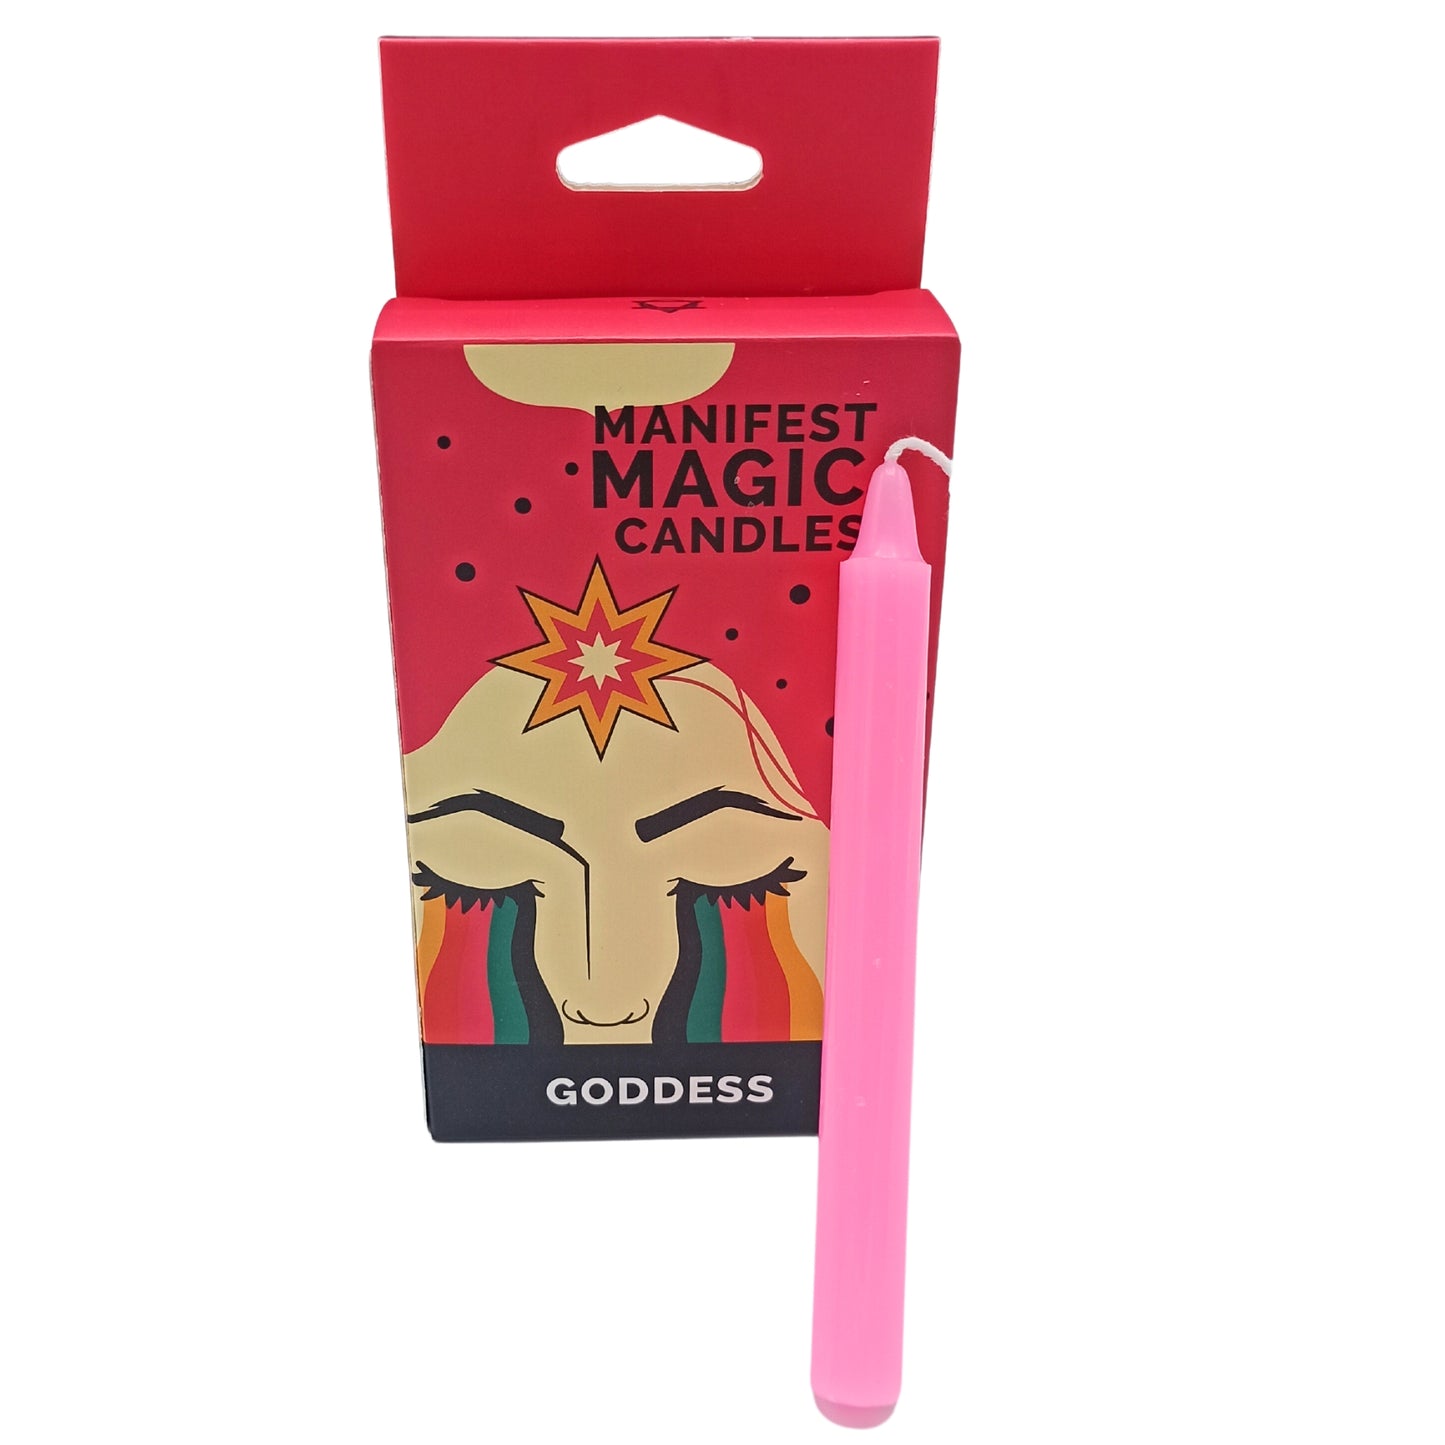 Manifest Magic Candles (pack of 12) - Pink - Kaftans direct